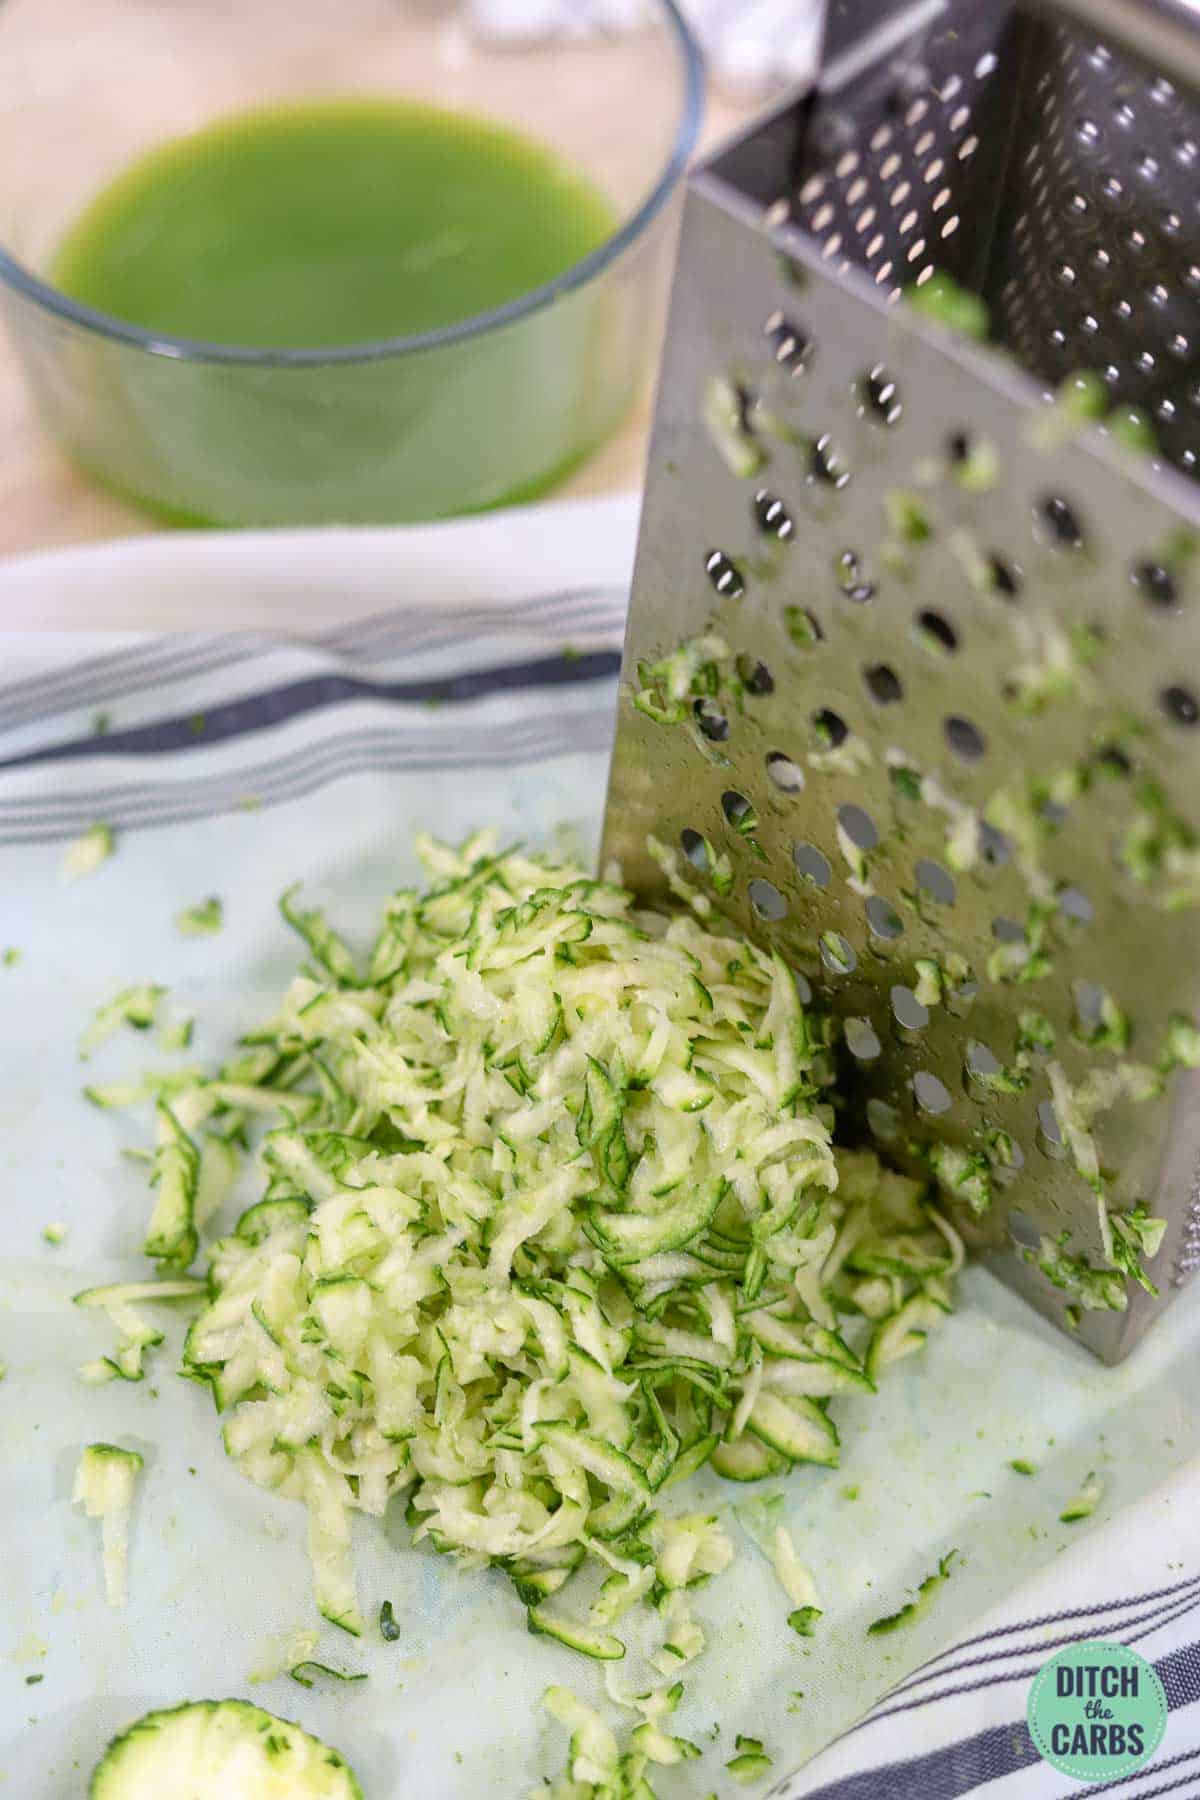 grated zucchini and a metal grater